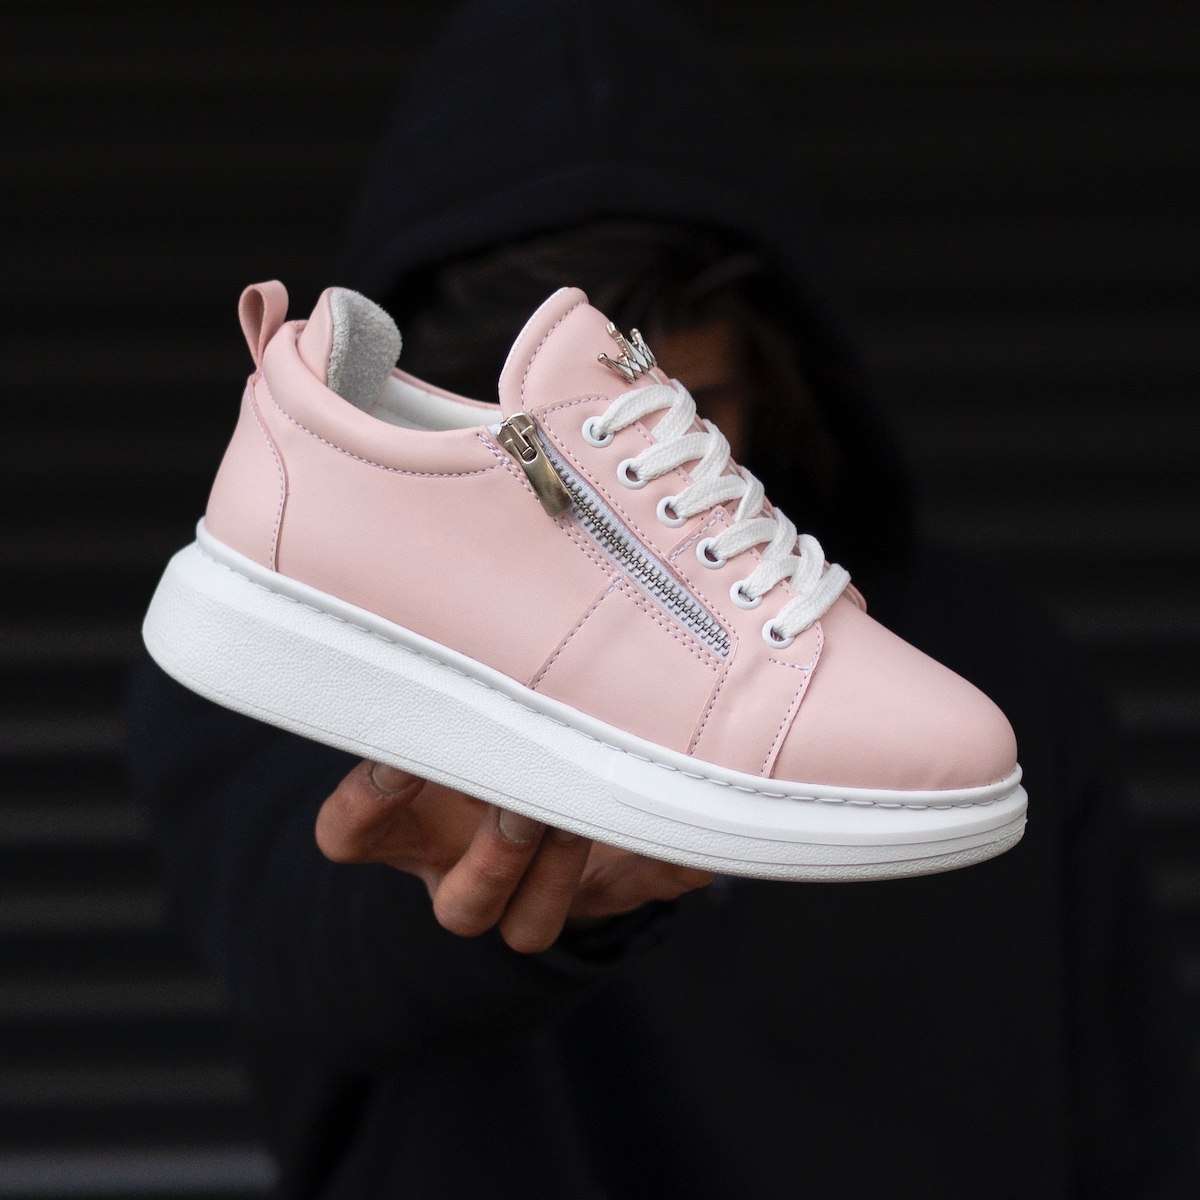 Woman Hype Sole Zipped Style Full Pink Sneakers - 1